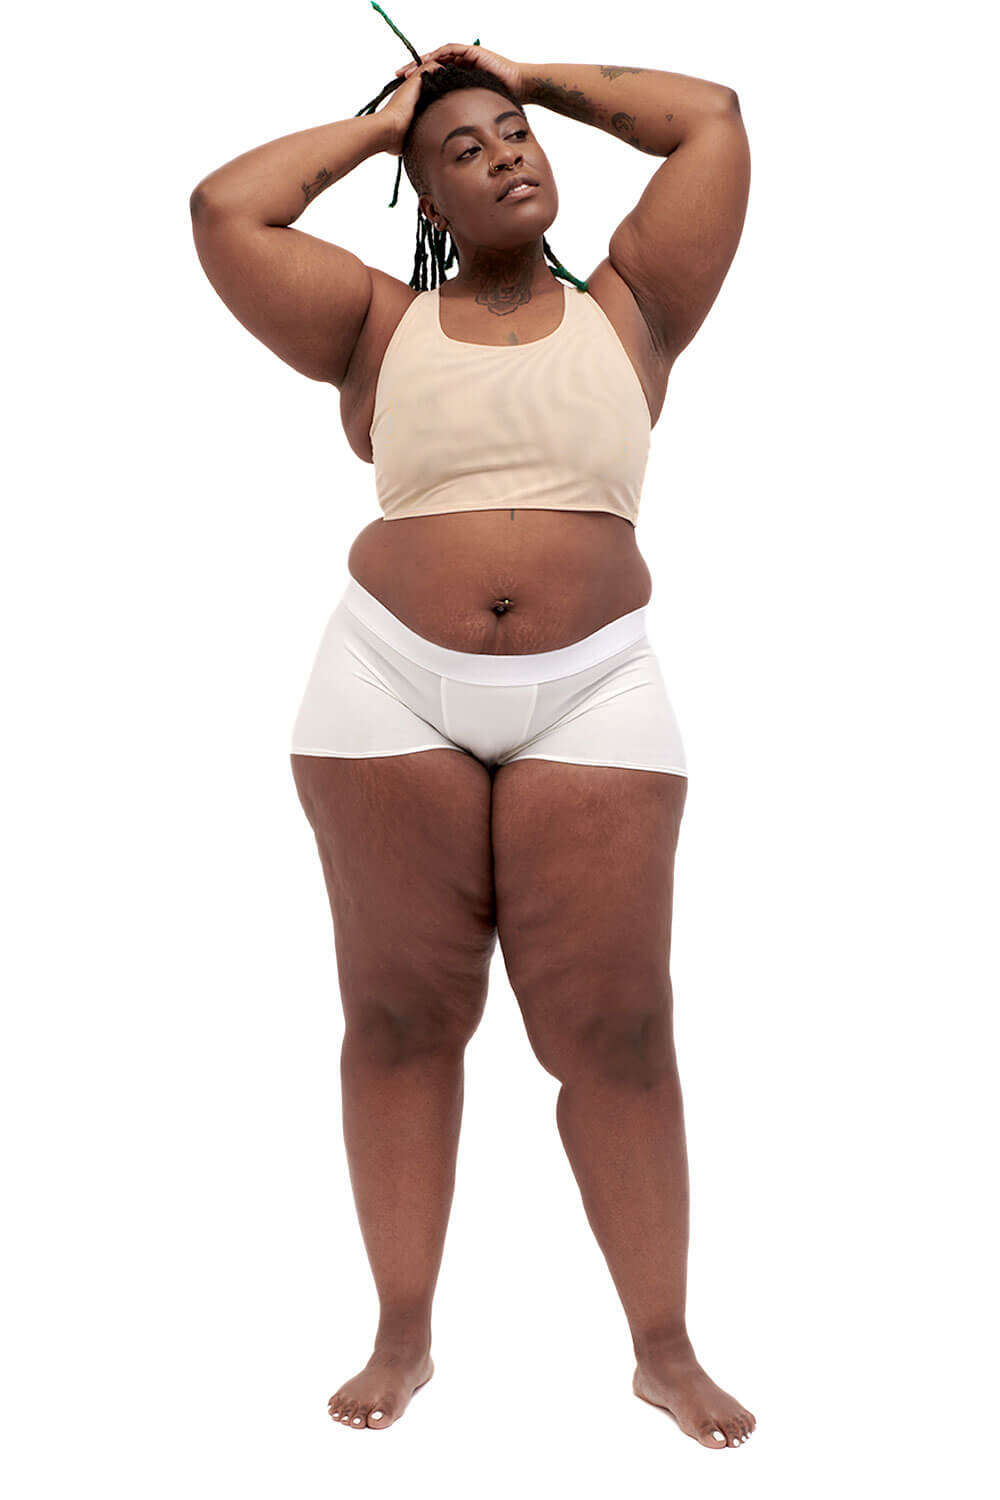 Plus-sized person wearing a nude racerback side-open chest binder made from breathable mesh, photographed from the front with arms up.